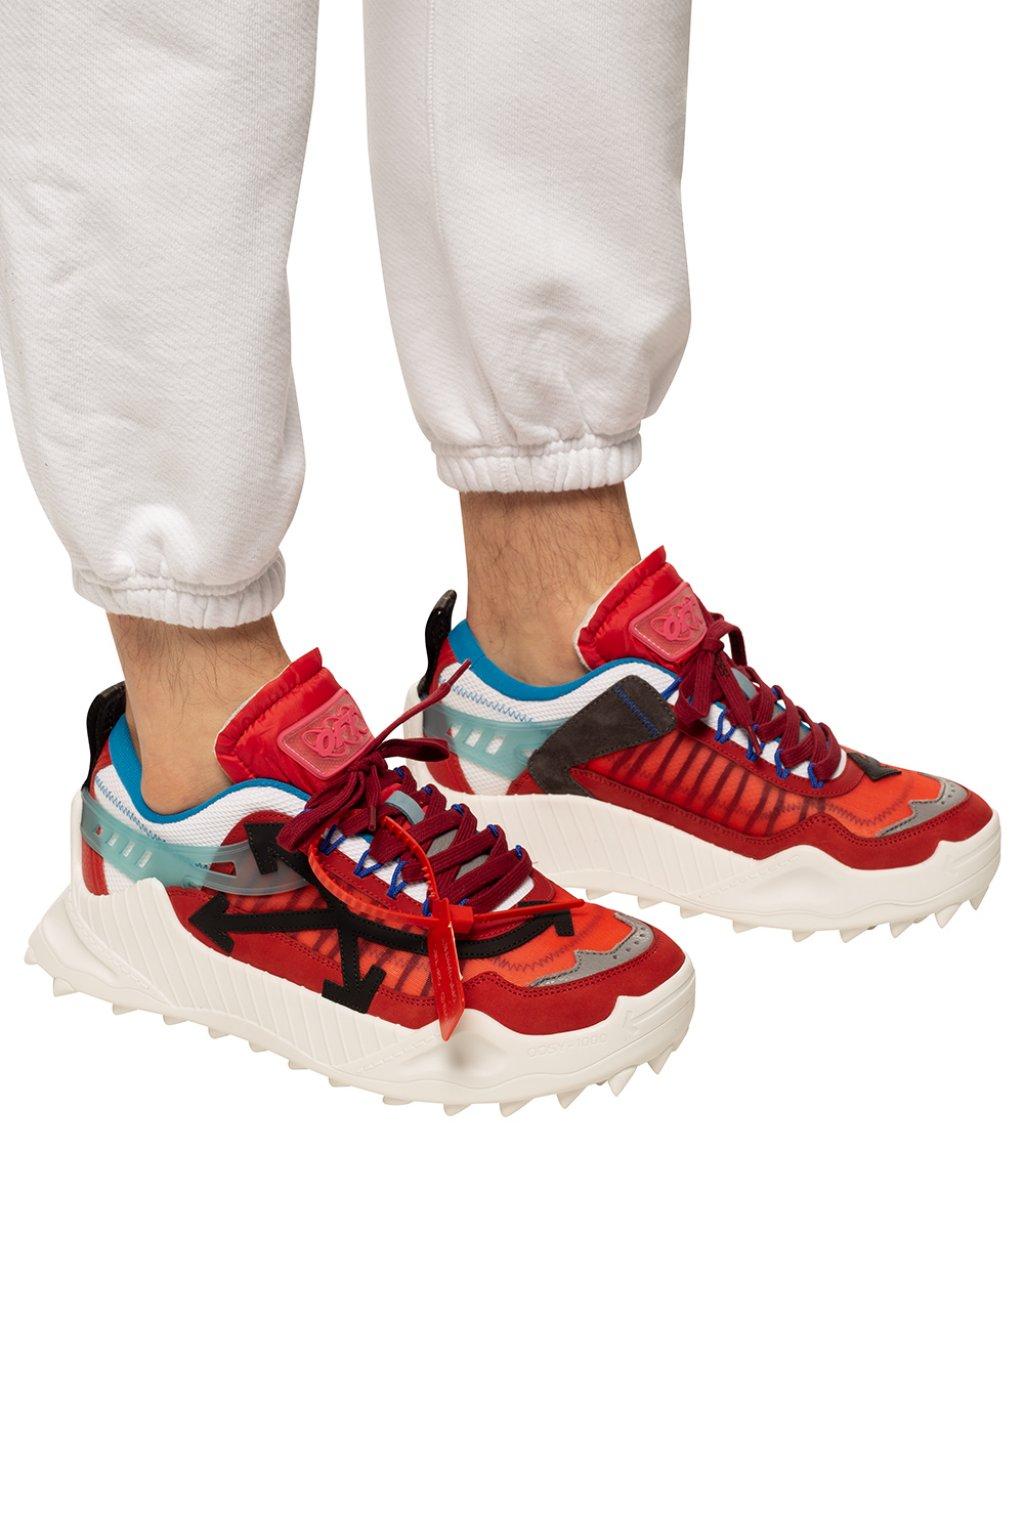 Off-White c/o Virgil Abloh Odsy-1000 Sneakers in Red for Men - Lyst